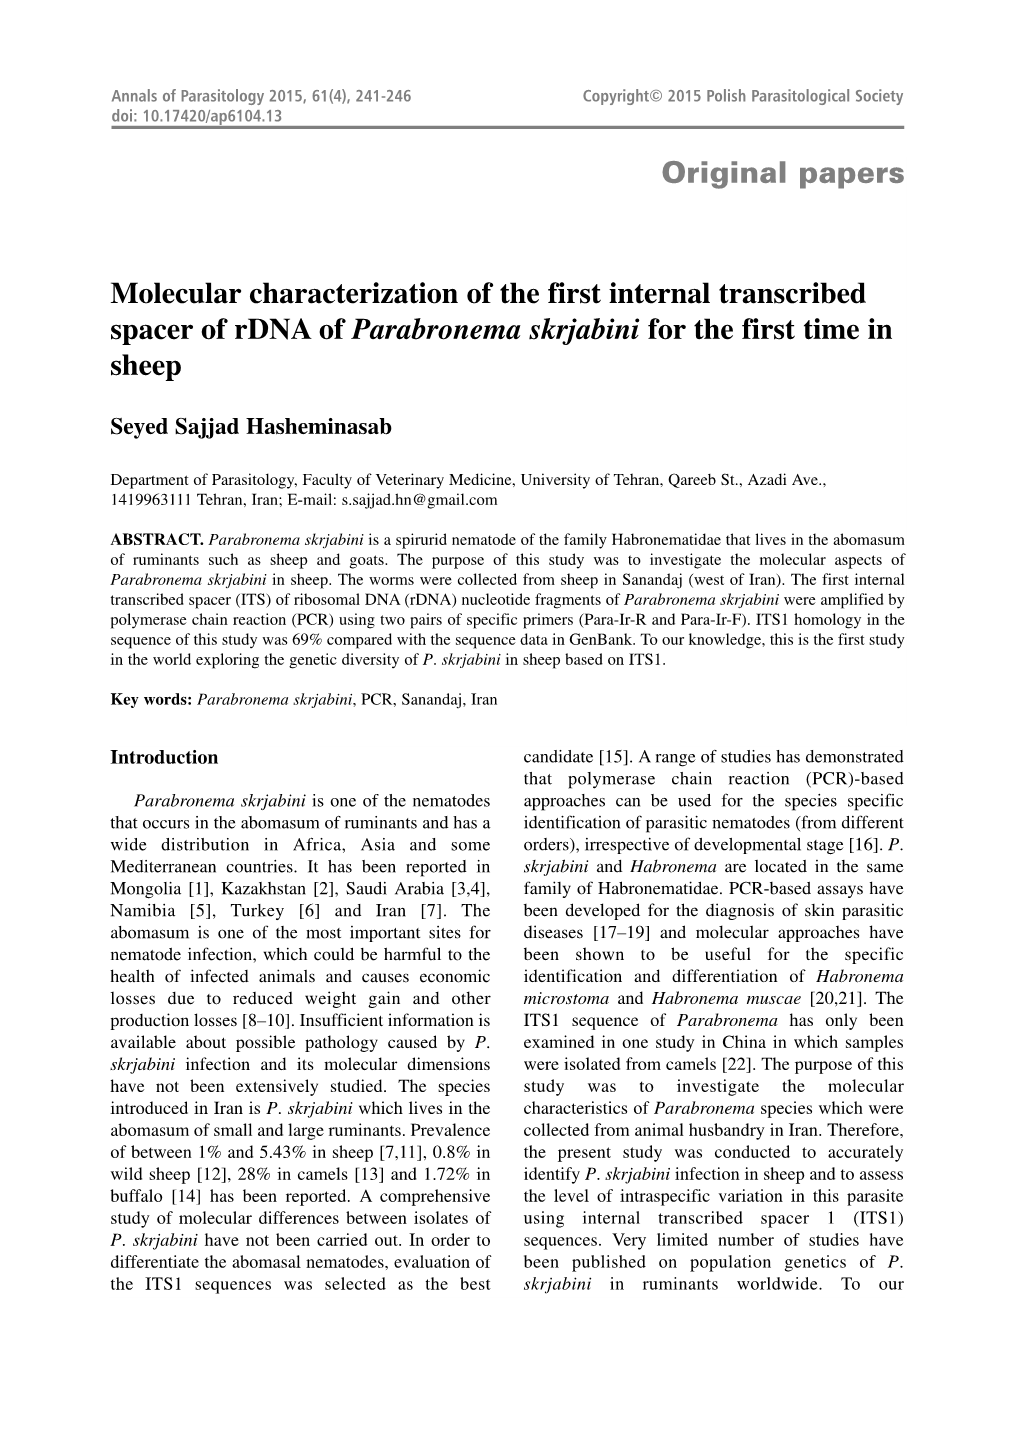 Original Papers Molecular Characterization of the First Internal